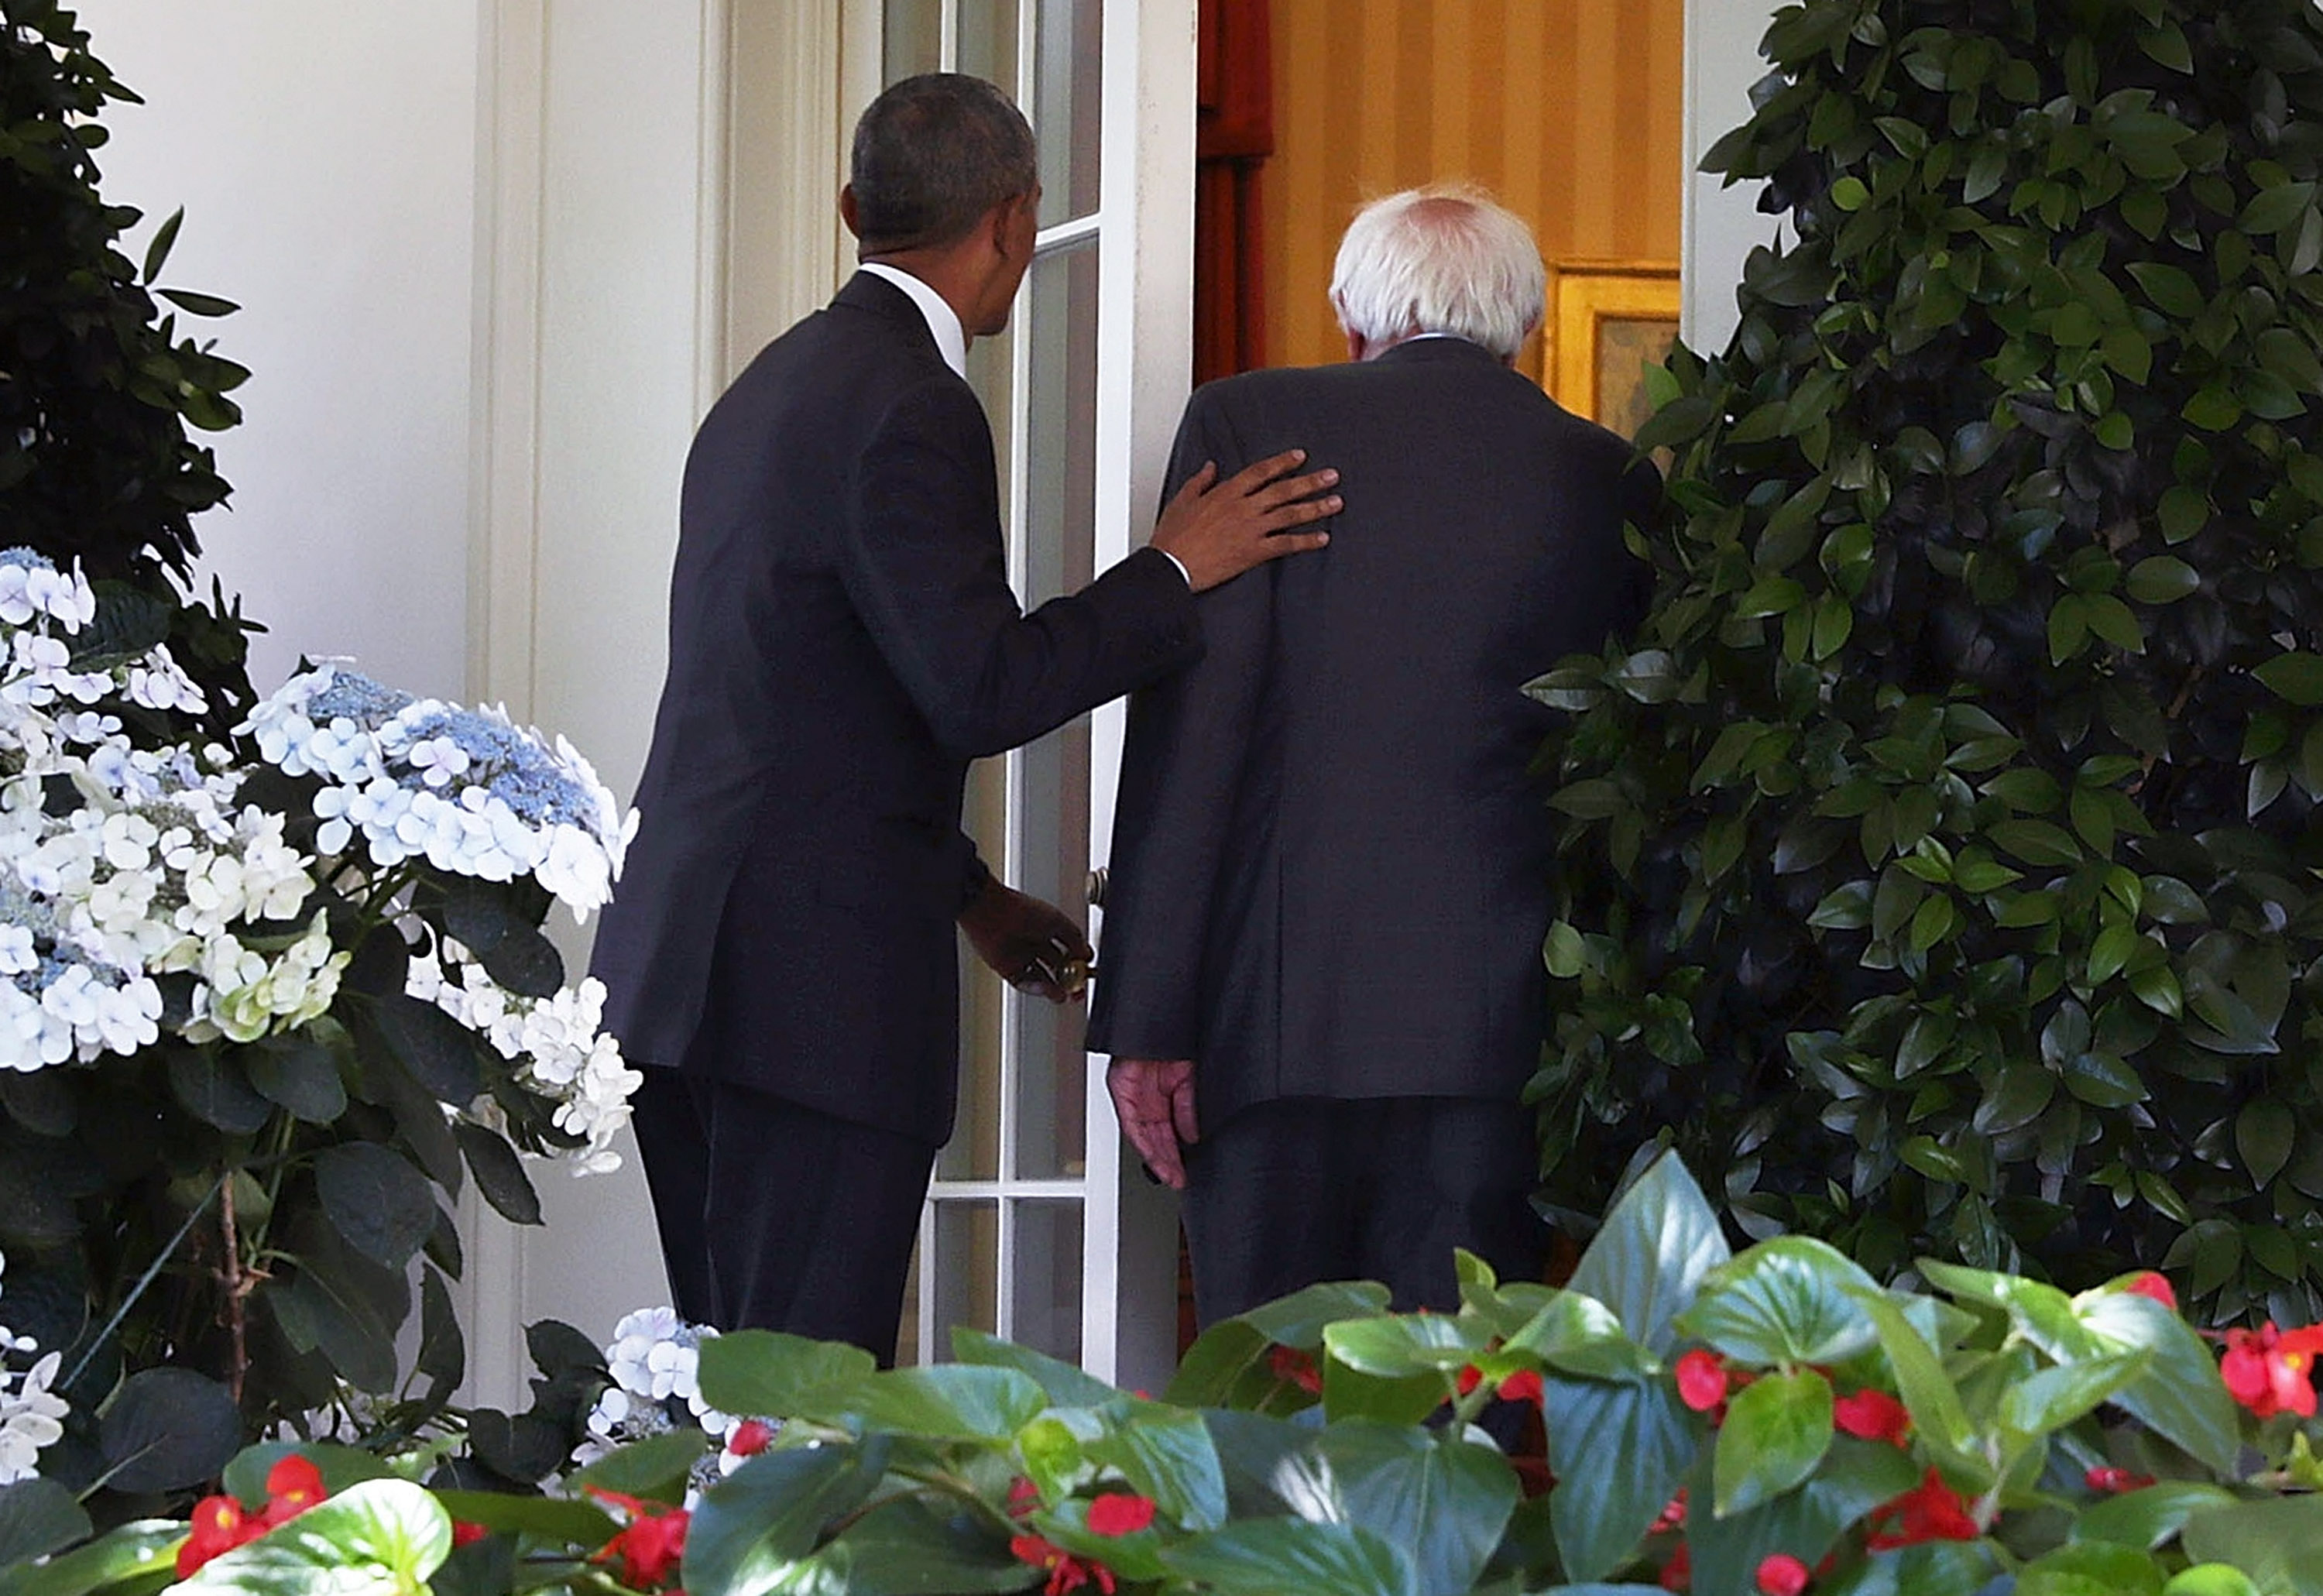 WASHINGTON, DC - JUNE 09: (EDITORS NOTE: Retransmission with alternate crop.) Democratic presidential candidate Sen. Bernie Sanders (D-VT) (R) enters the Oval Office with President Barack Obama (L) as he arrives at the White House for a meeting June 9, 2016 in Washington, DC. Sanders met with President Obama after Hillary Clinton has clinched the Democratic nomination for president. 